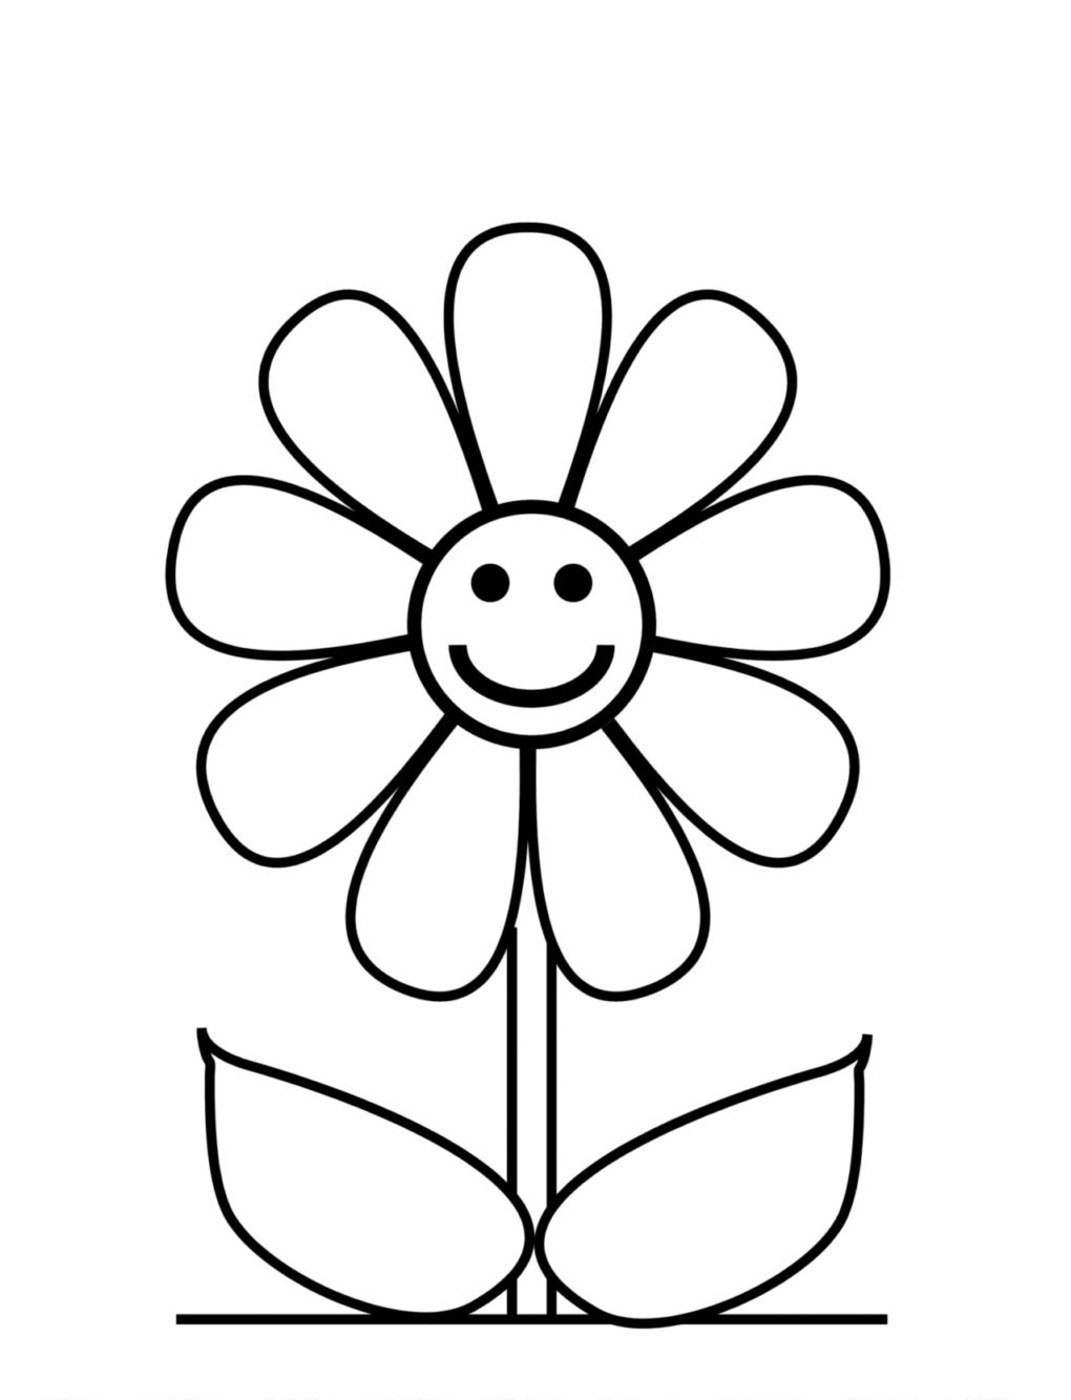 Simple Flower Coloring Sheets | Coloring Online